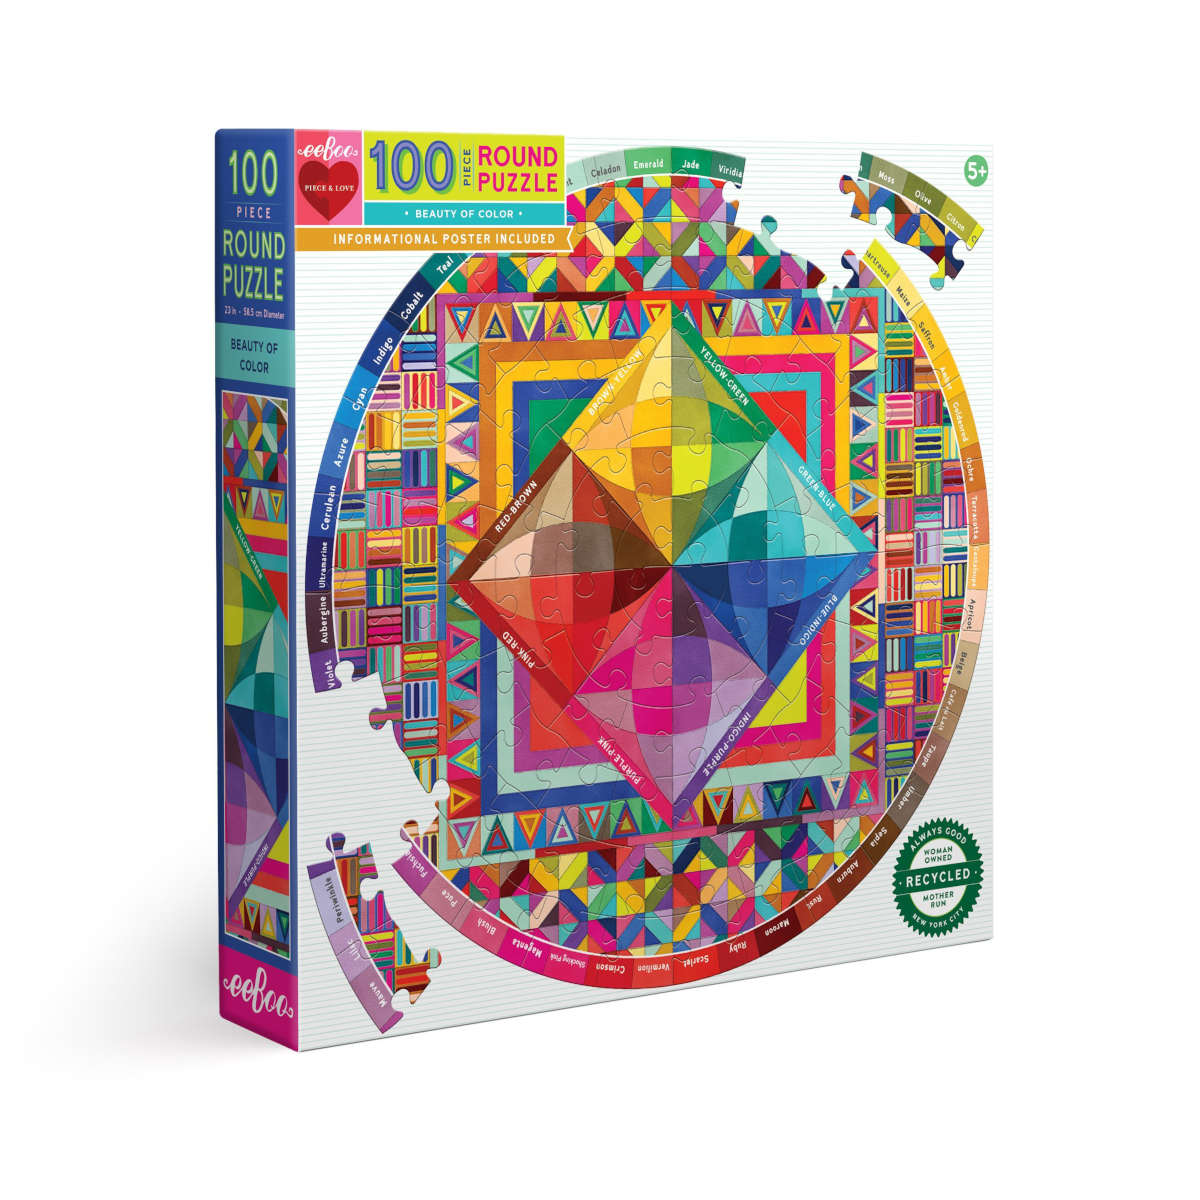 Beauty of Color 100 piece round puzzle by eeBoo